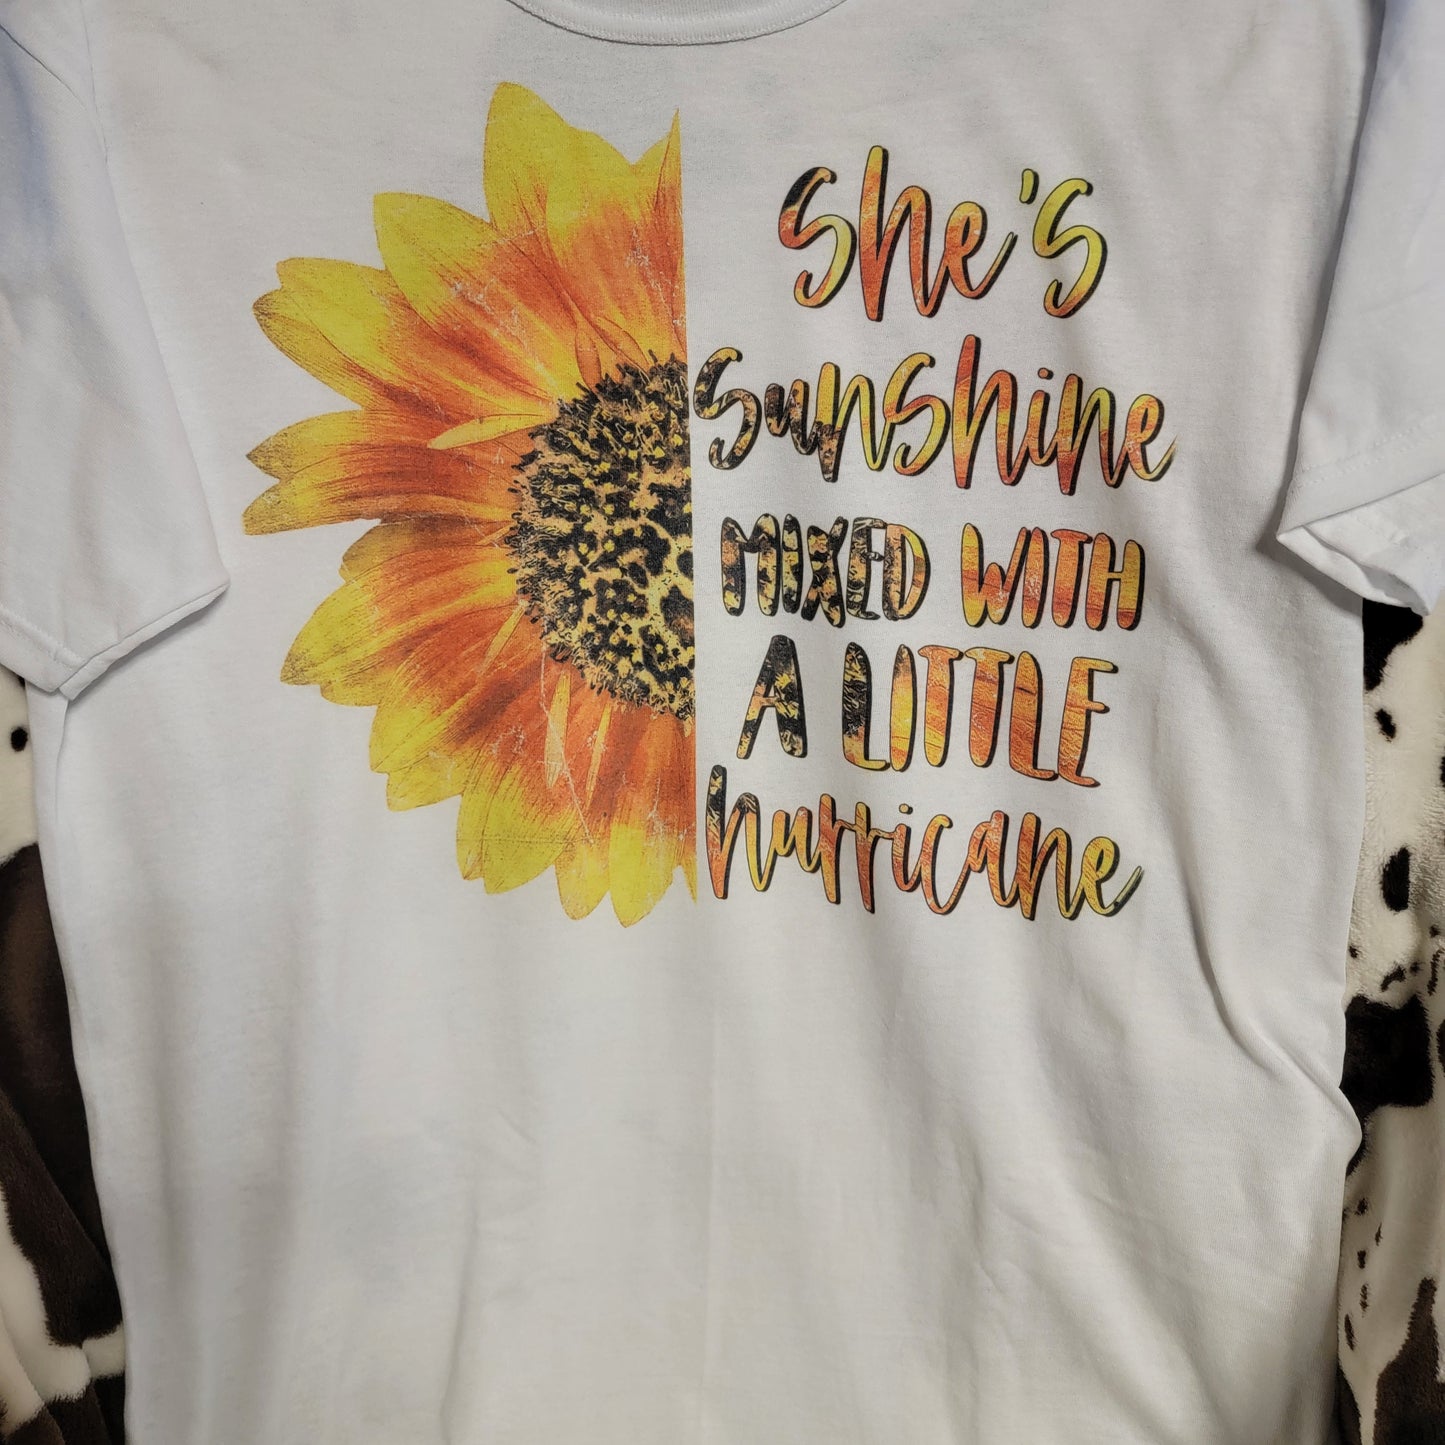 Shes Sunshine Mixed With Hurricane Graphic Tee